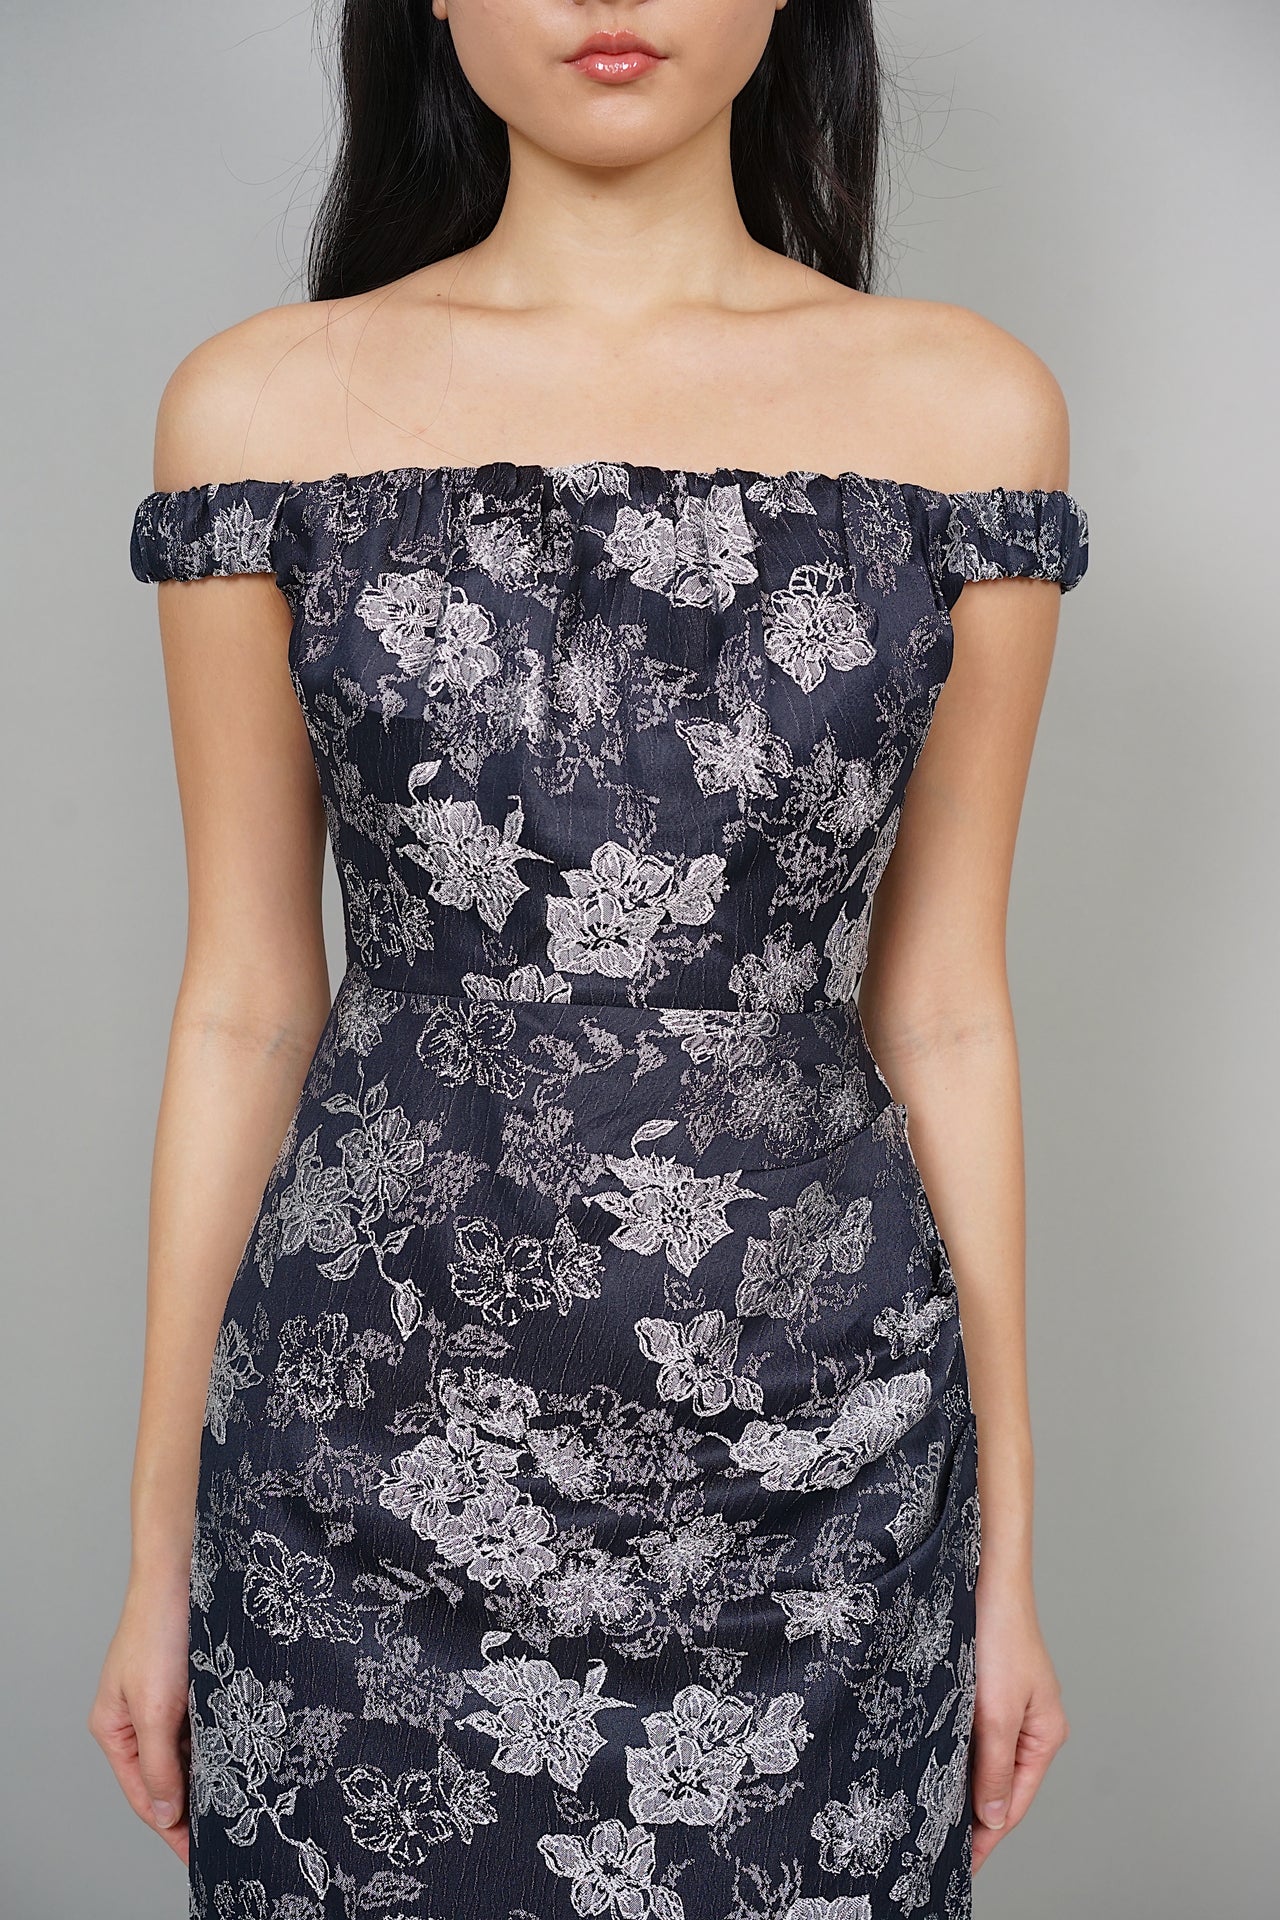 Ray Off-Shoulder Midi Dress in Midnight Floral